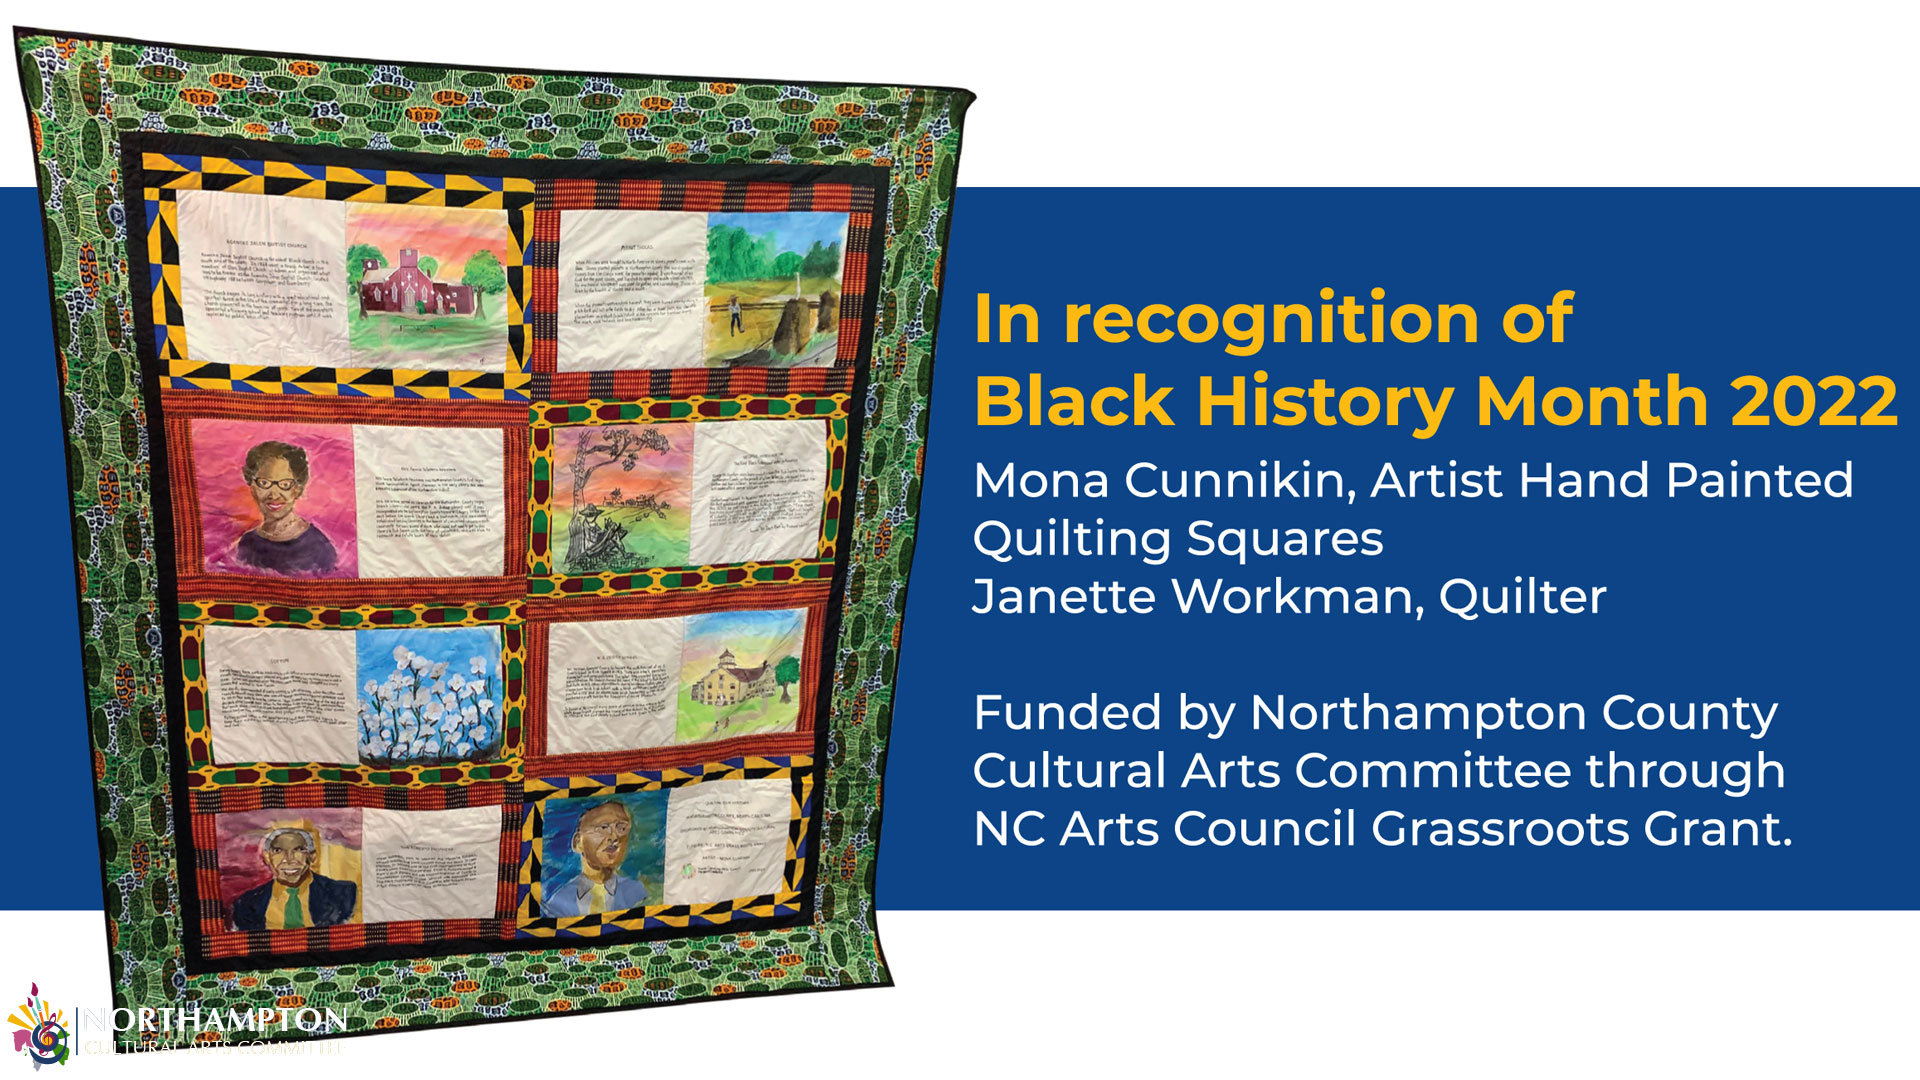 Mona Cunnikin, Artist, hand painted quilting squares.  Janette Workman, quilter.